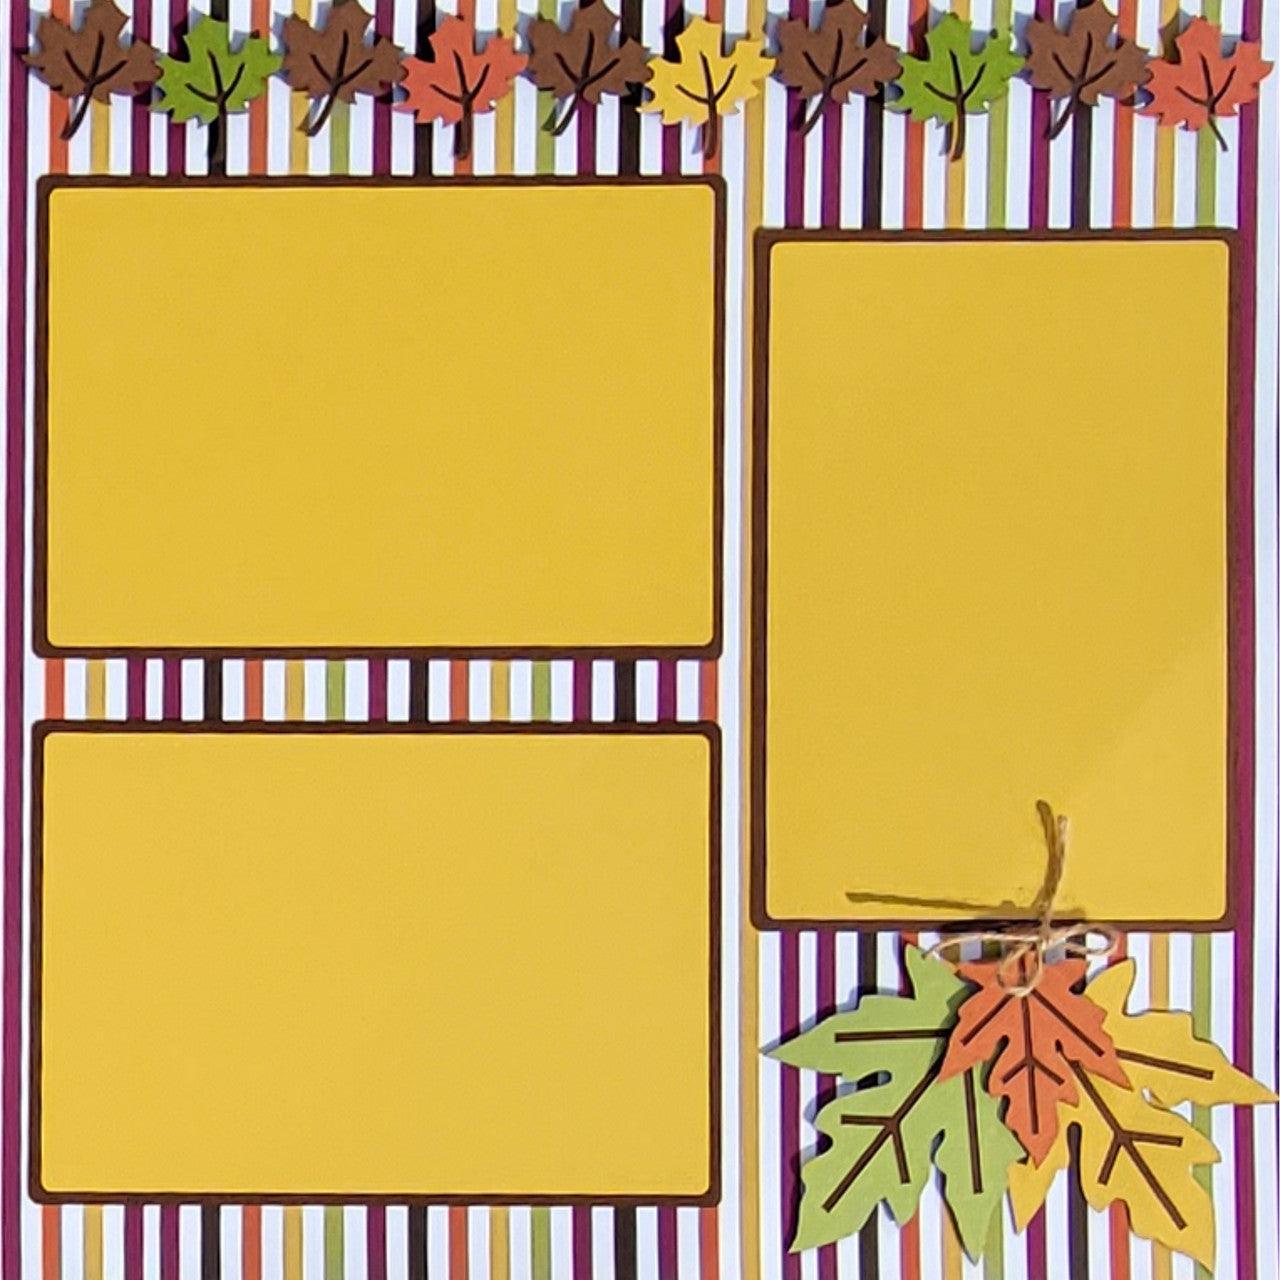 Falling Leaves Pre-Made Embellished Two-Page 12 x 12 Scrapbook Layout by SSC Laser Designs - Scrapbook Supply Companies